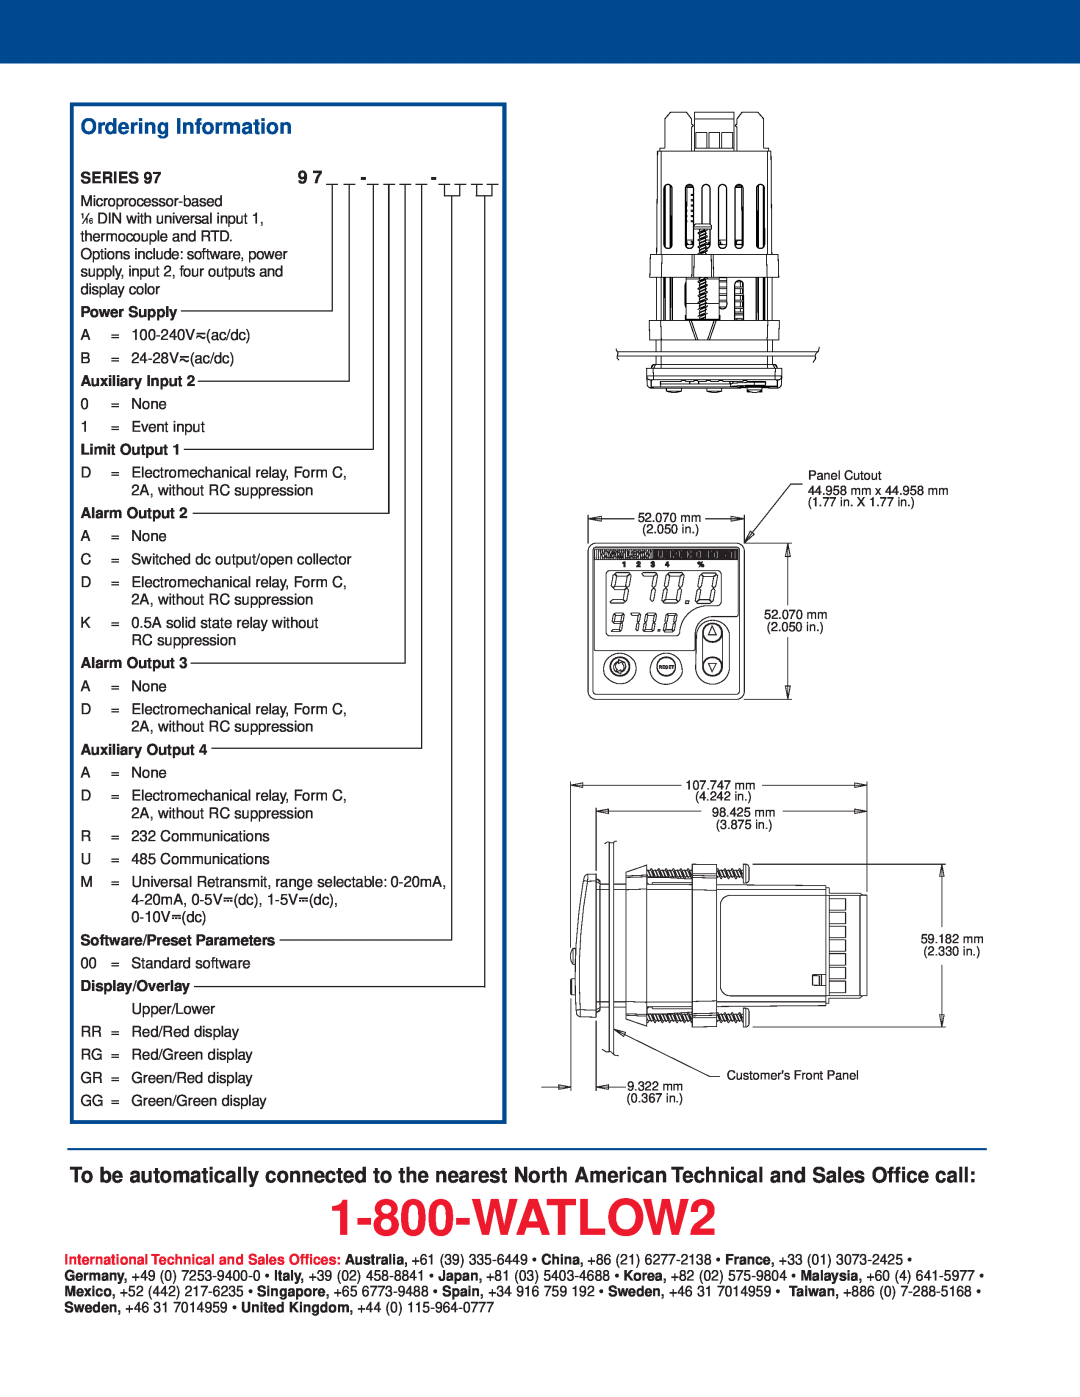 Watlow Electric Series 97 warranty Ordering Information, WATLOW2, Power Supply, Auxiliary Input, Limit Output, Alarm Output 